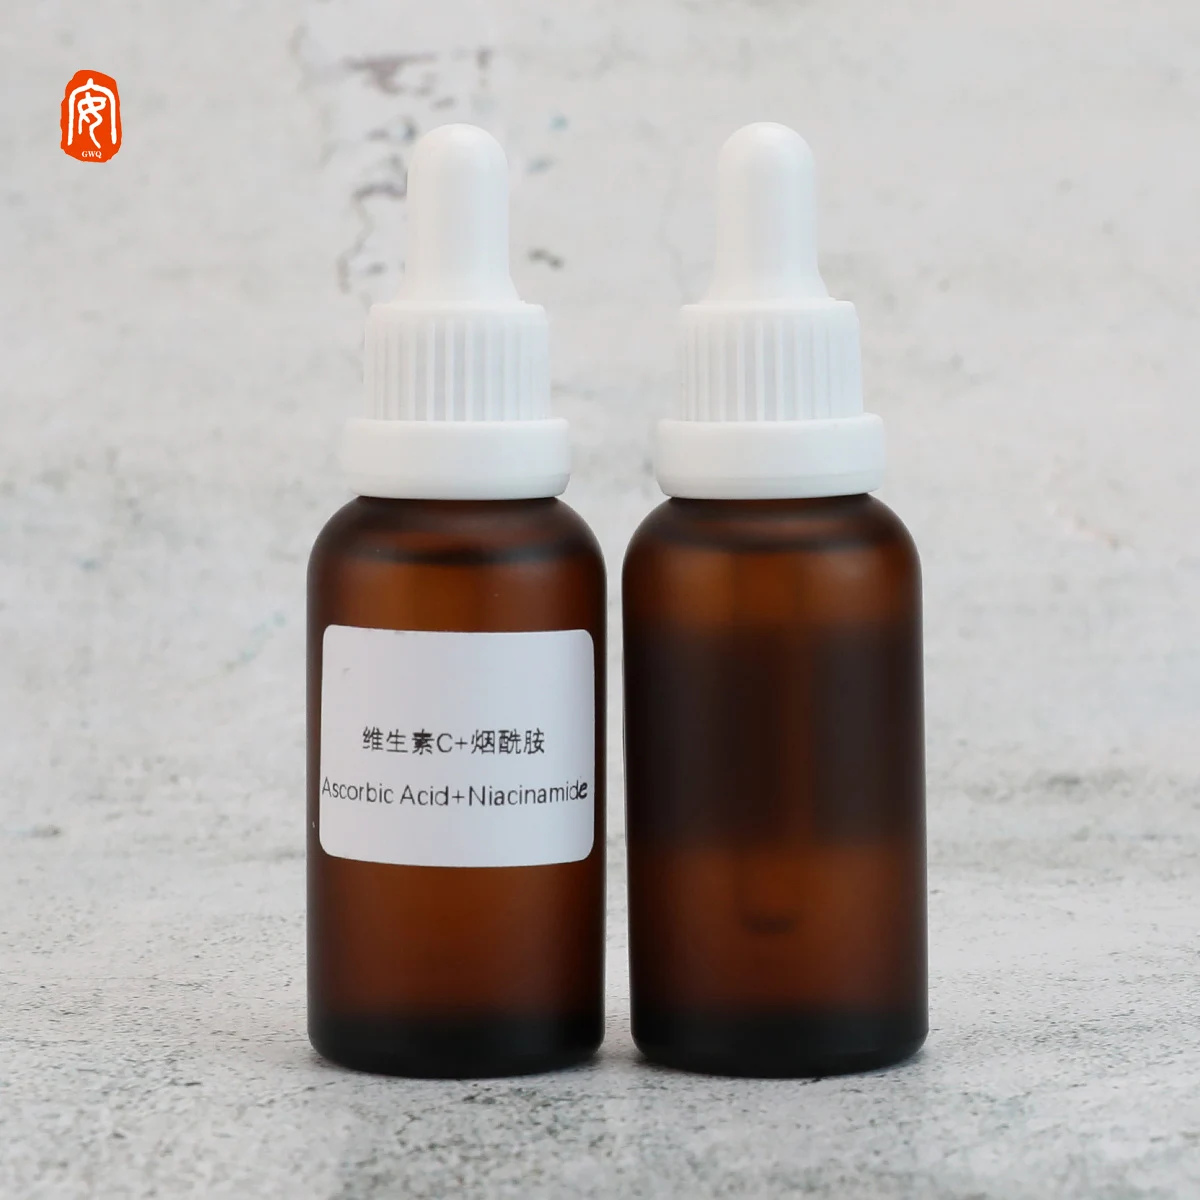 

Beauty Best Products Firming Hydrating Anti-aging Mesotherapy Hyaluronic Acid Serum Skin Care Supplier Hyaluronic Acid Serum, Transparent